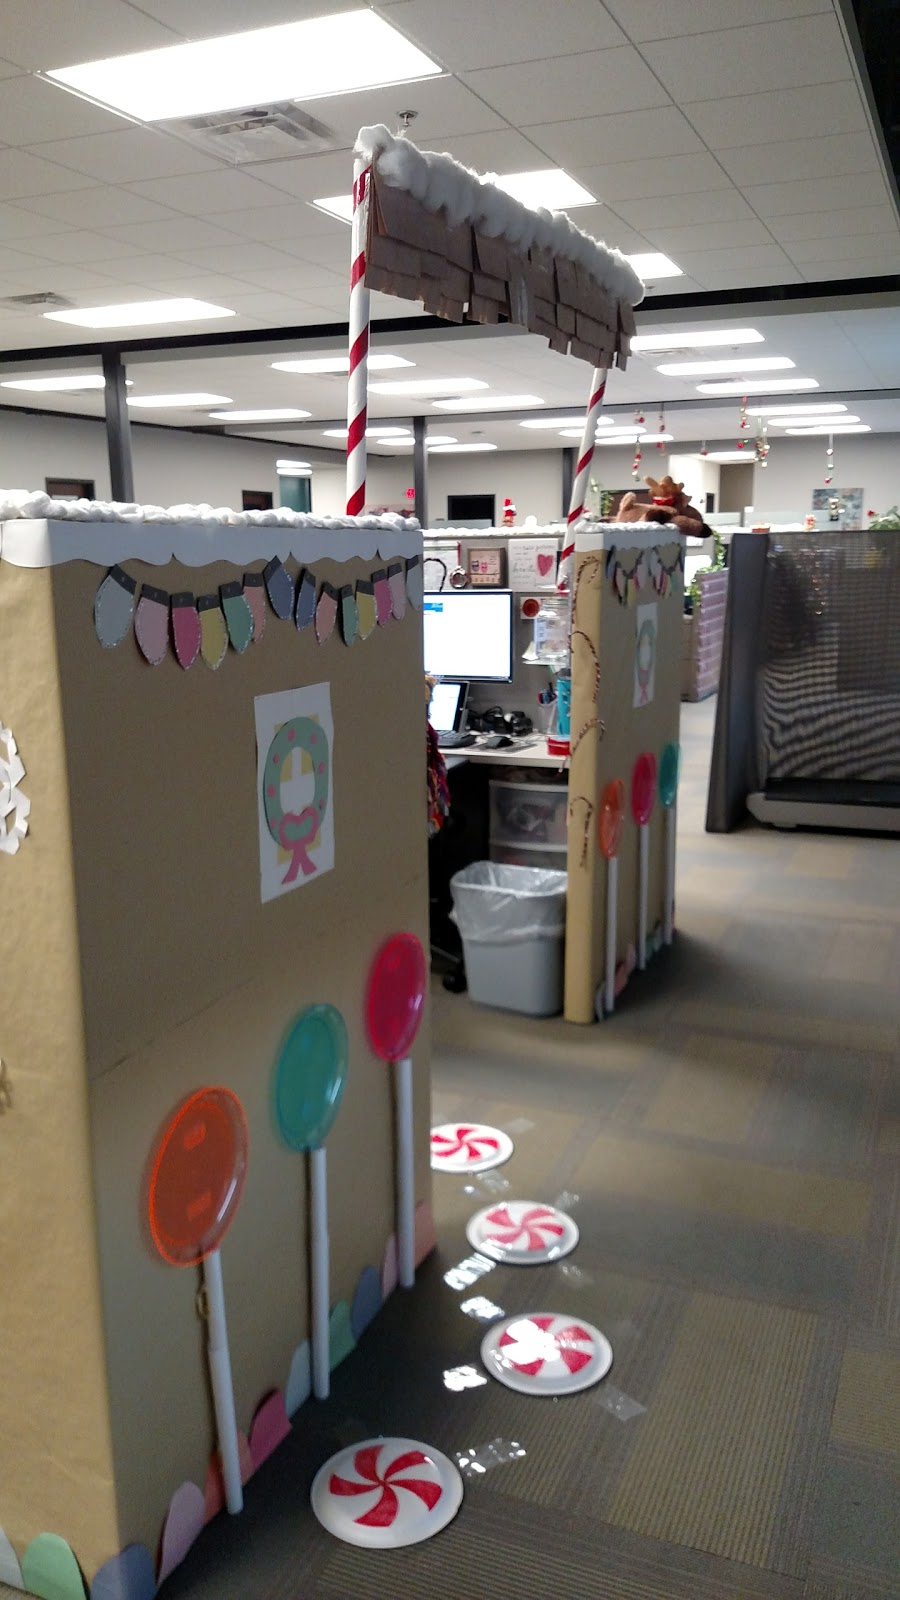 Erin's Crafty Endeavors: Cube decorating contest